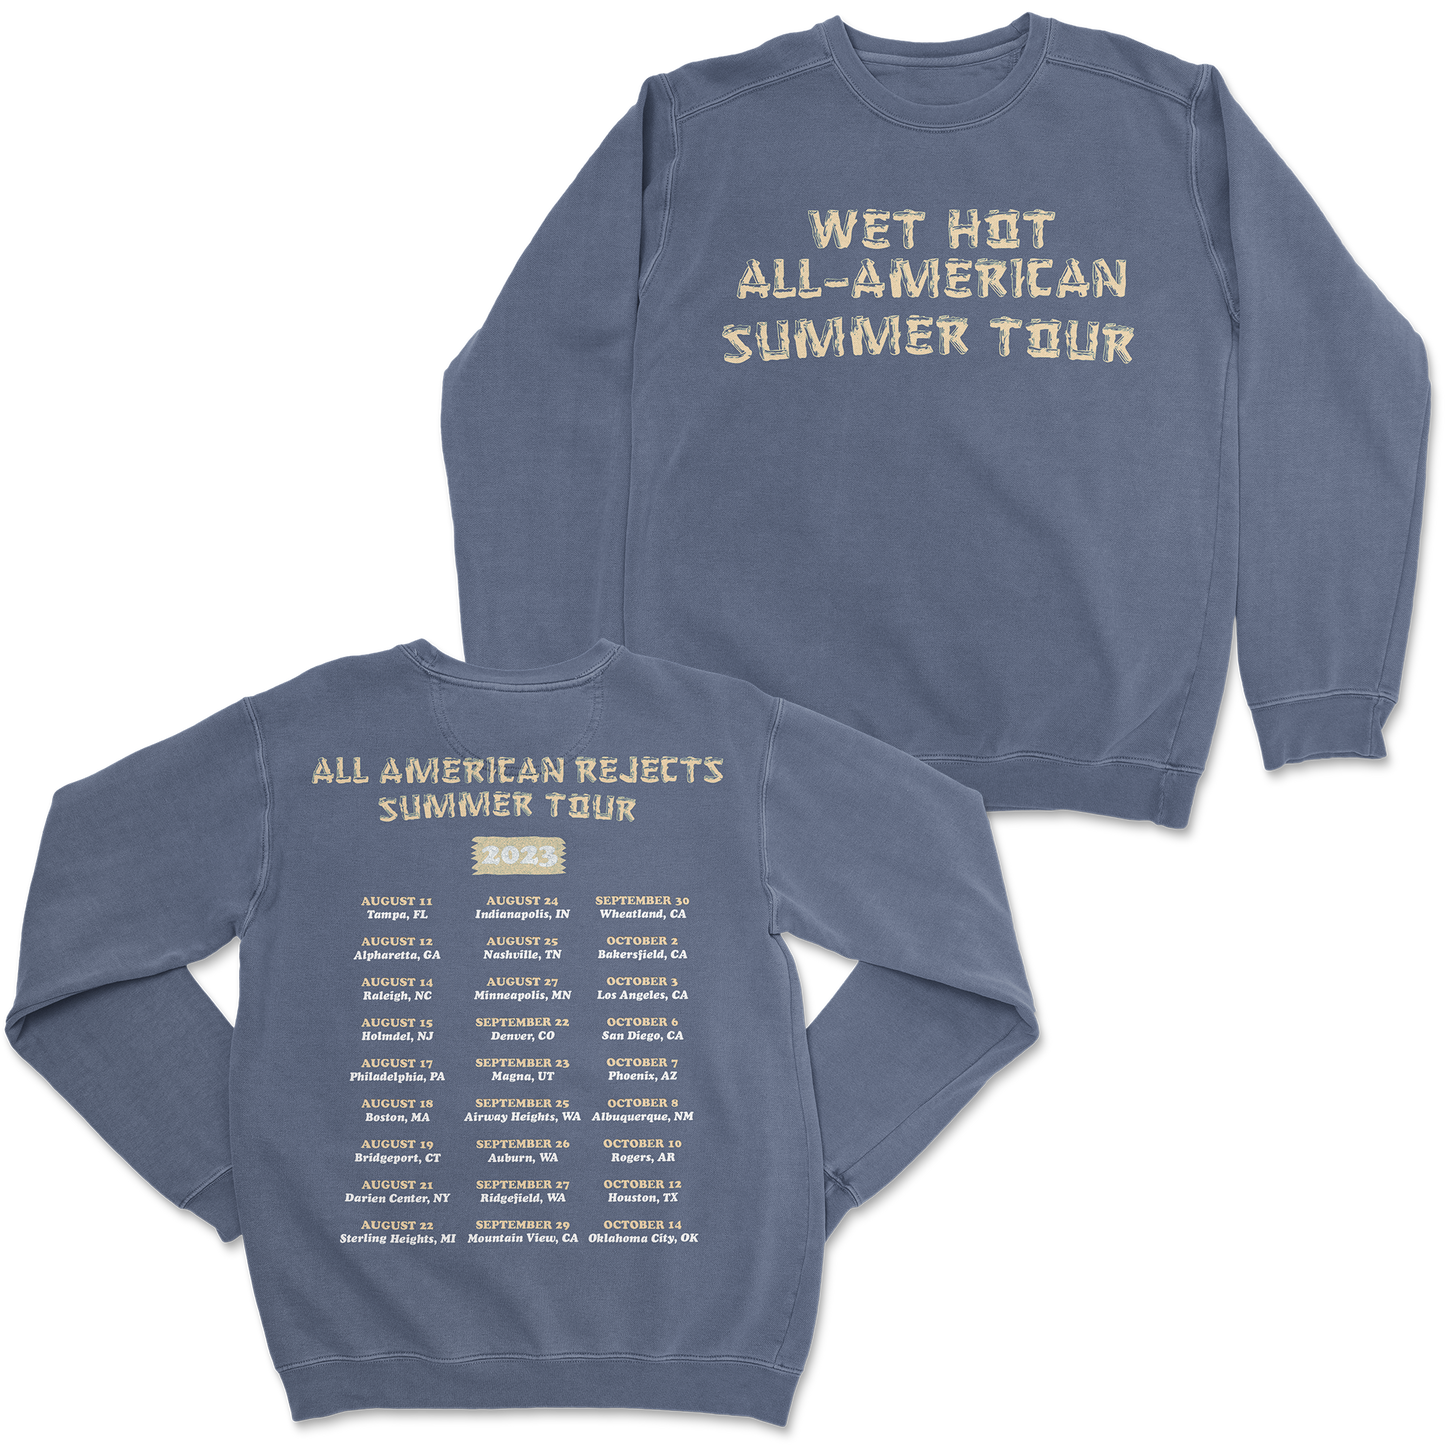 Wet Hot All-American Summer Tour Crewneck blue front and back